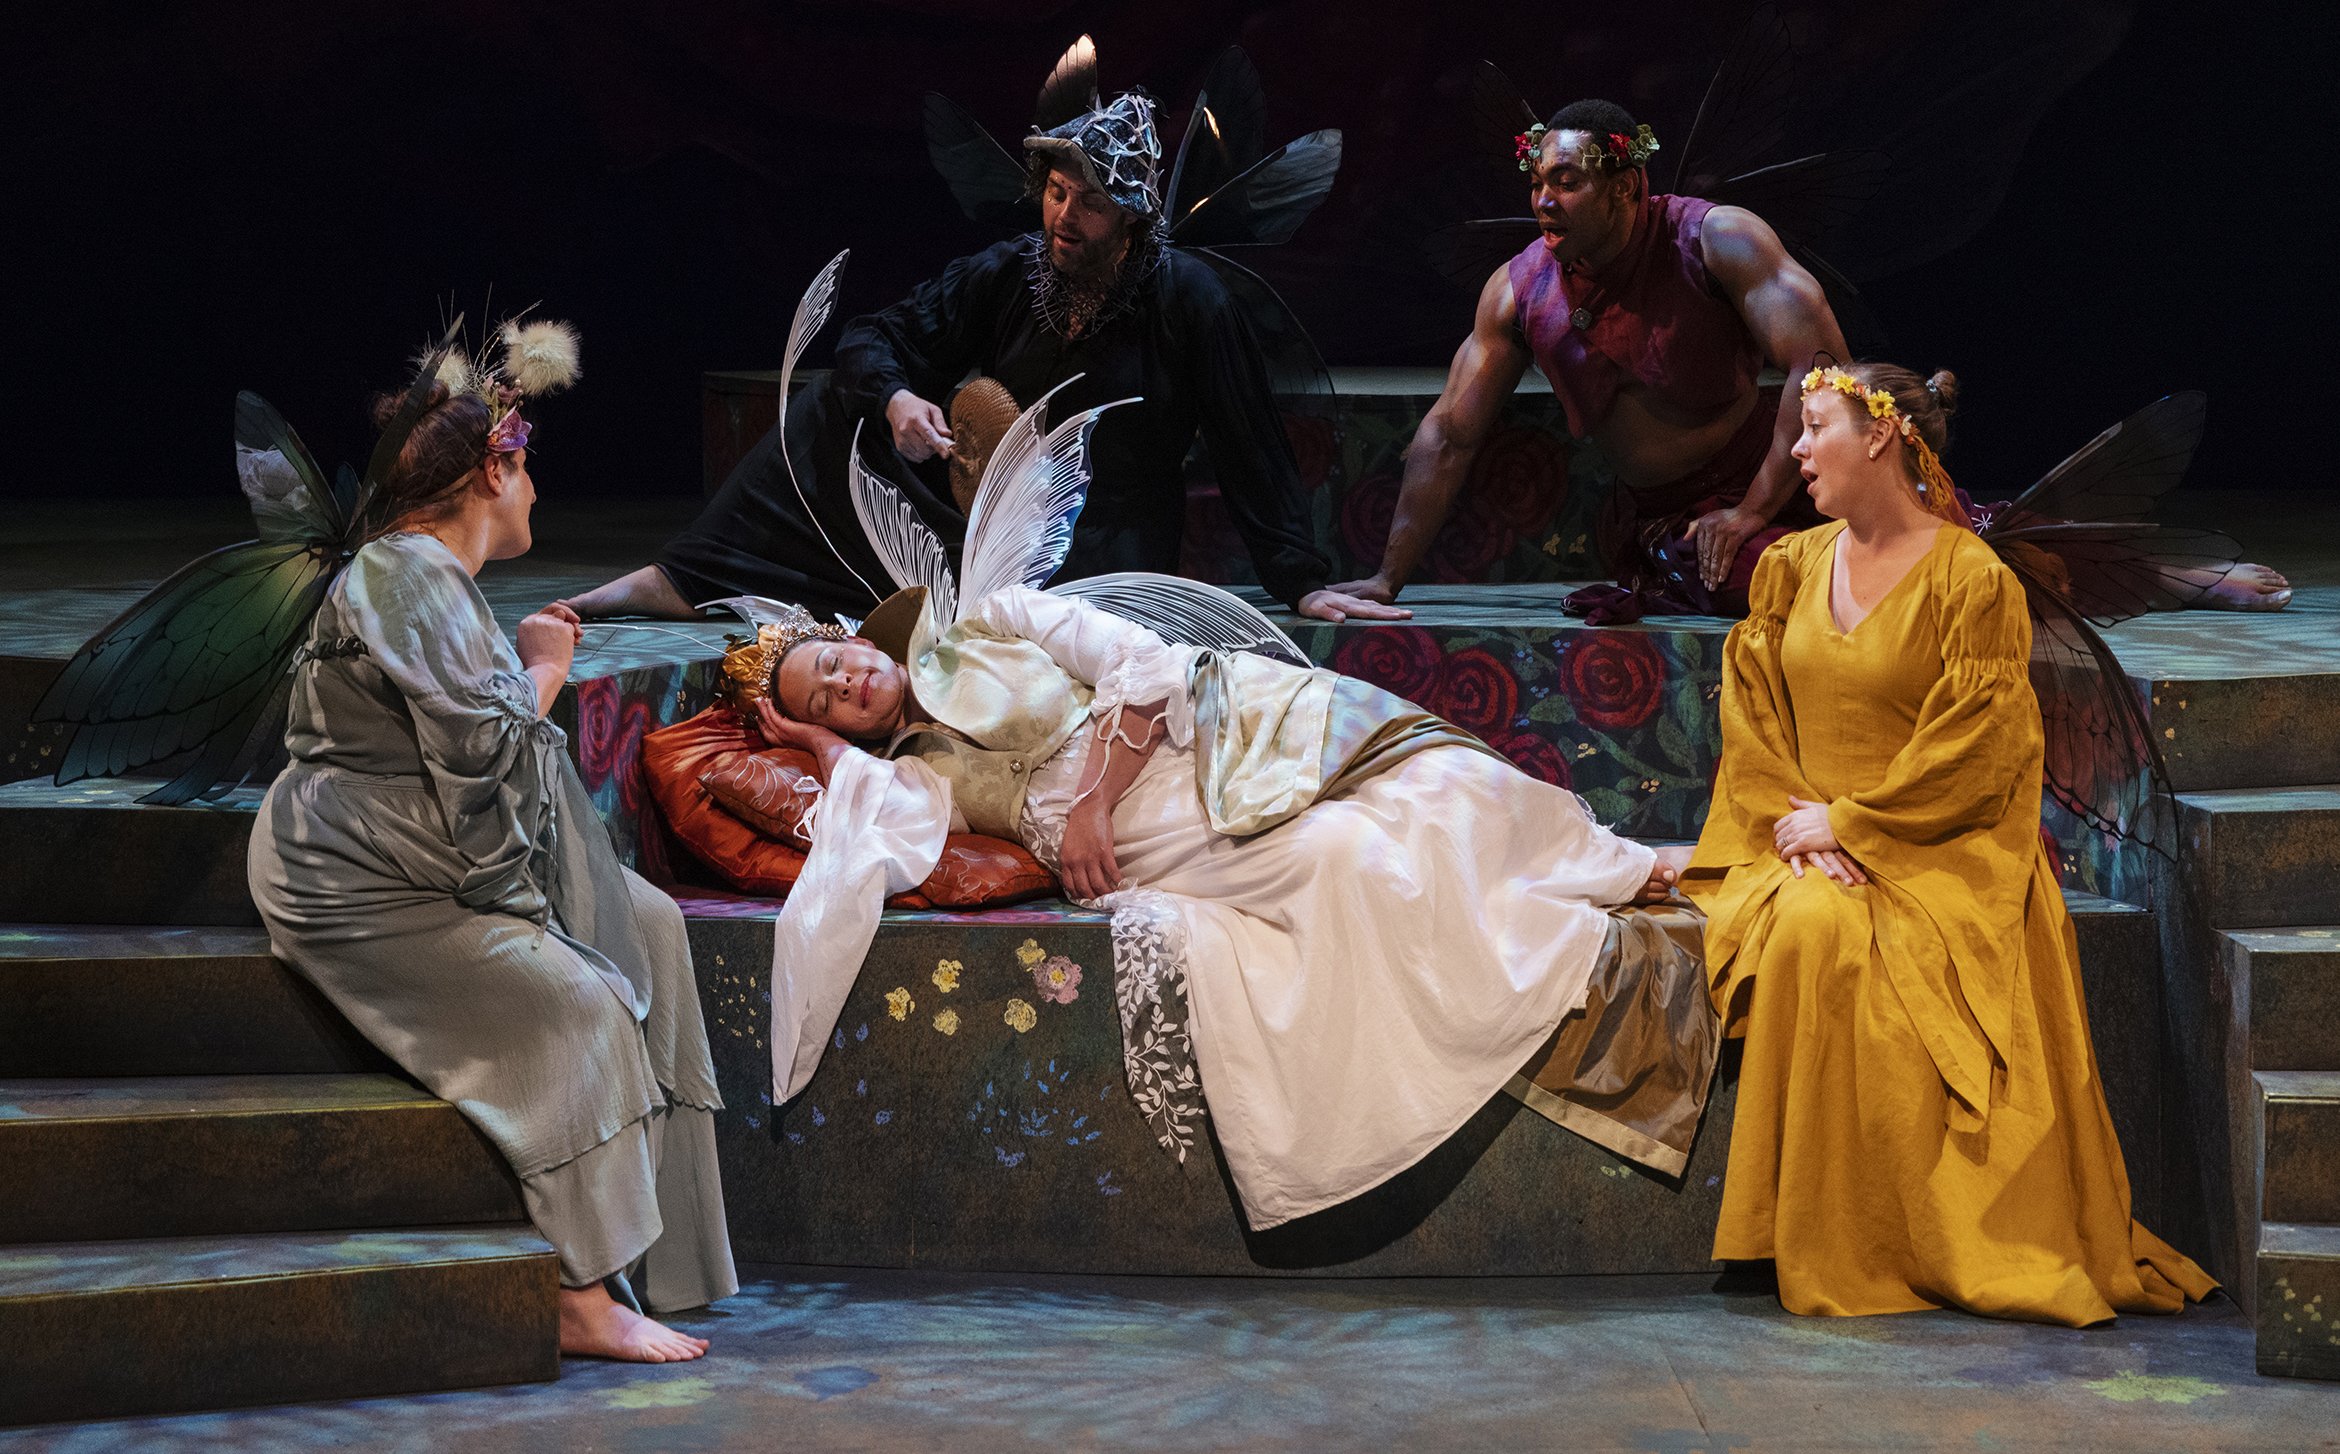 The Fairy Lullaby. Carley Elizabeth Preston as Titania with Julia Balestracci, Evan Werner, Jeffrey Baden and Kate Scally as the Fairies. Photo by Tim Fuller.